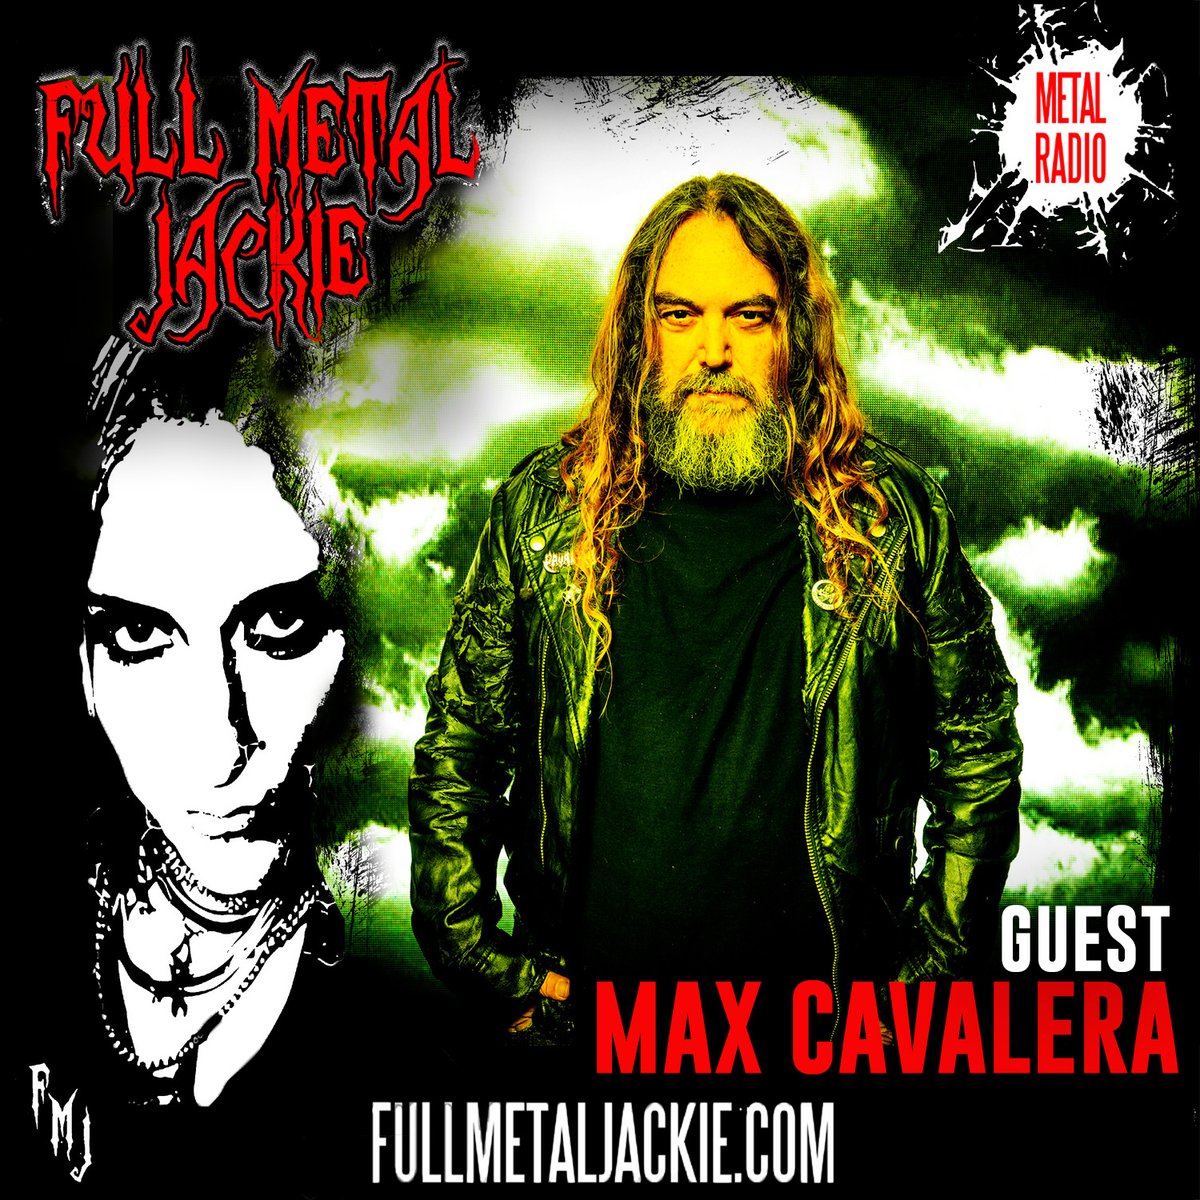 Max Cavalera will be a guest on the @FullMetalJackie radio show this weekend! Find a station airing/streaming the show: fullmetaljackieradio.com/weekend-show/